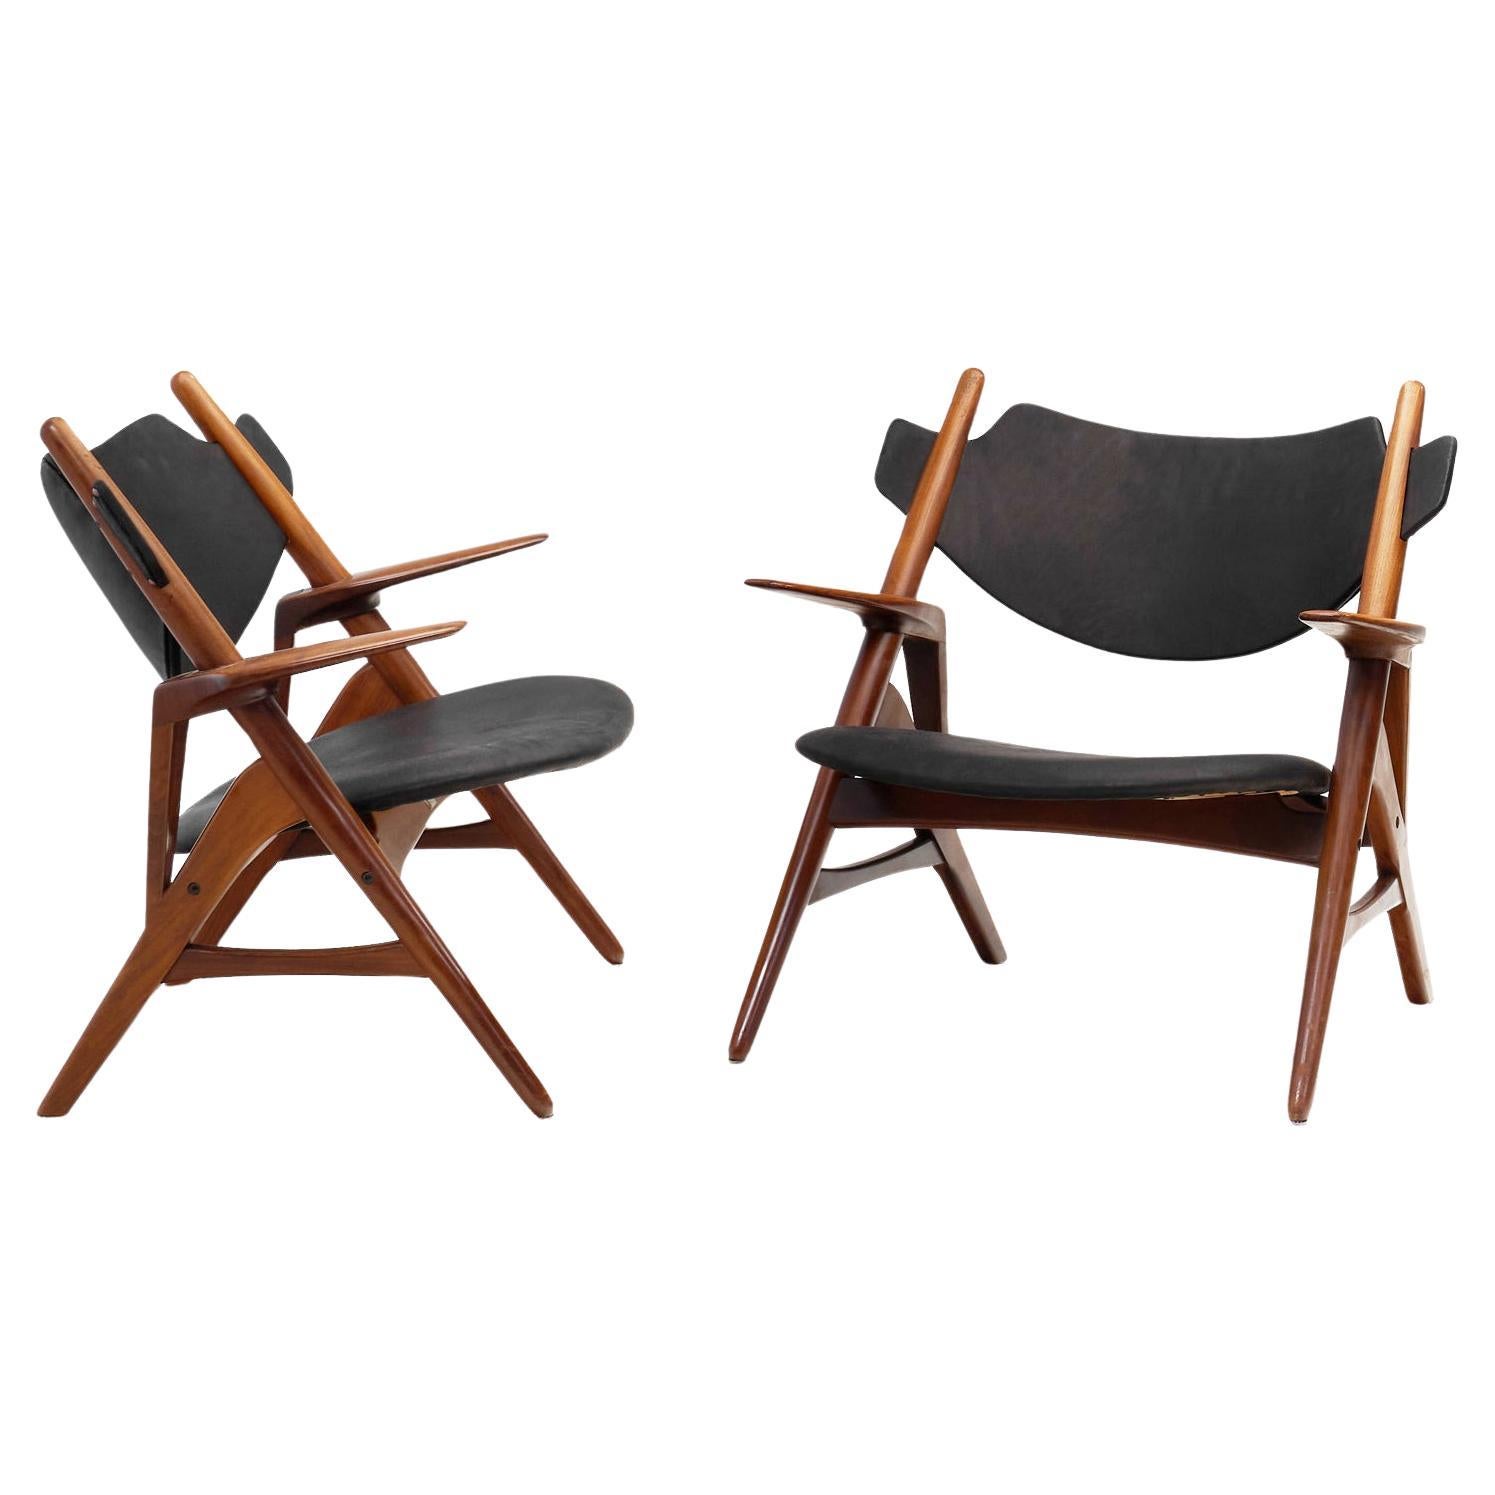 Set of 2 Sculptural Danish Mid-Century Modern Chairs, Denmark ca 1960s For Sale